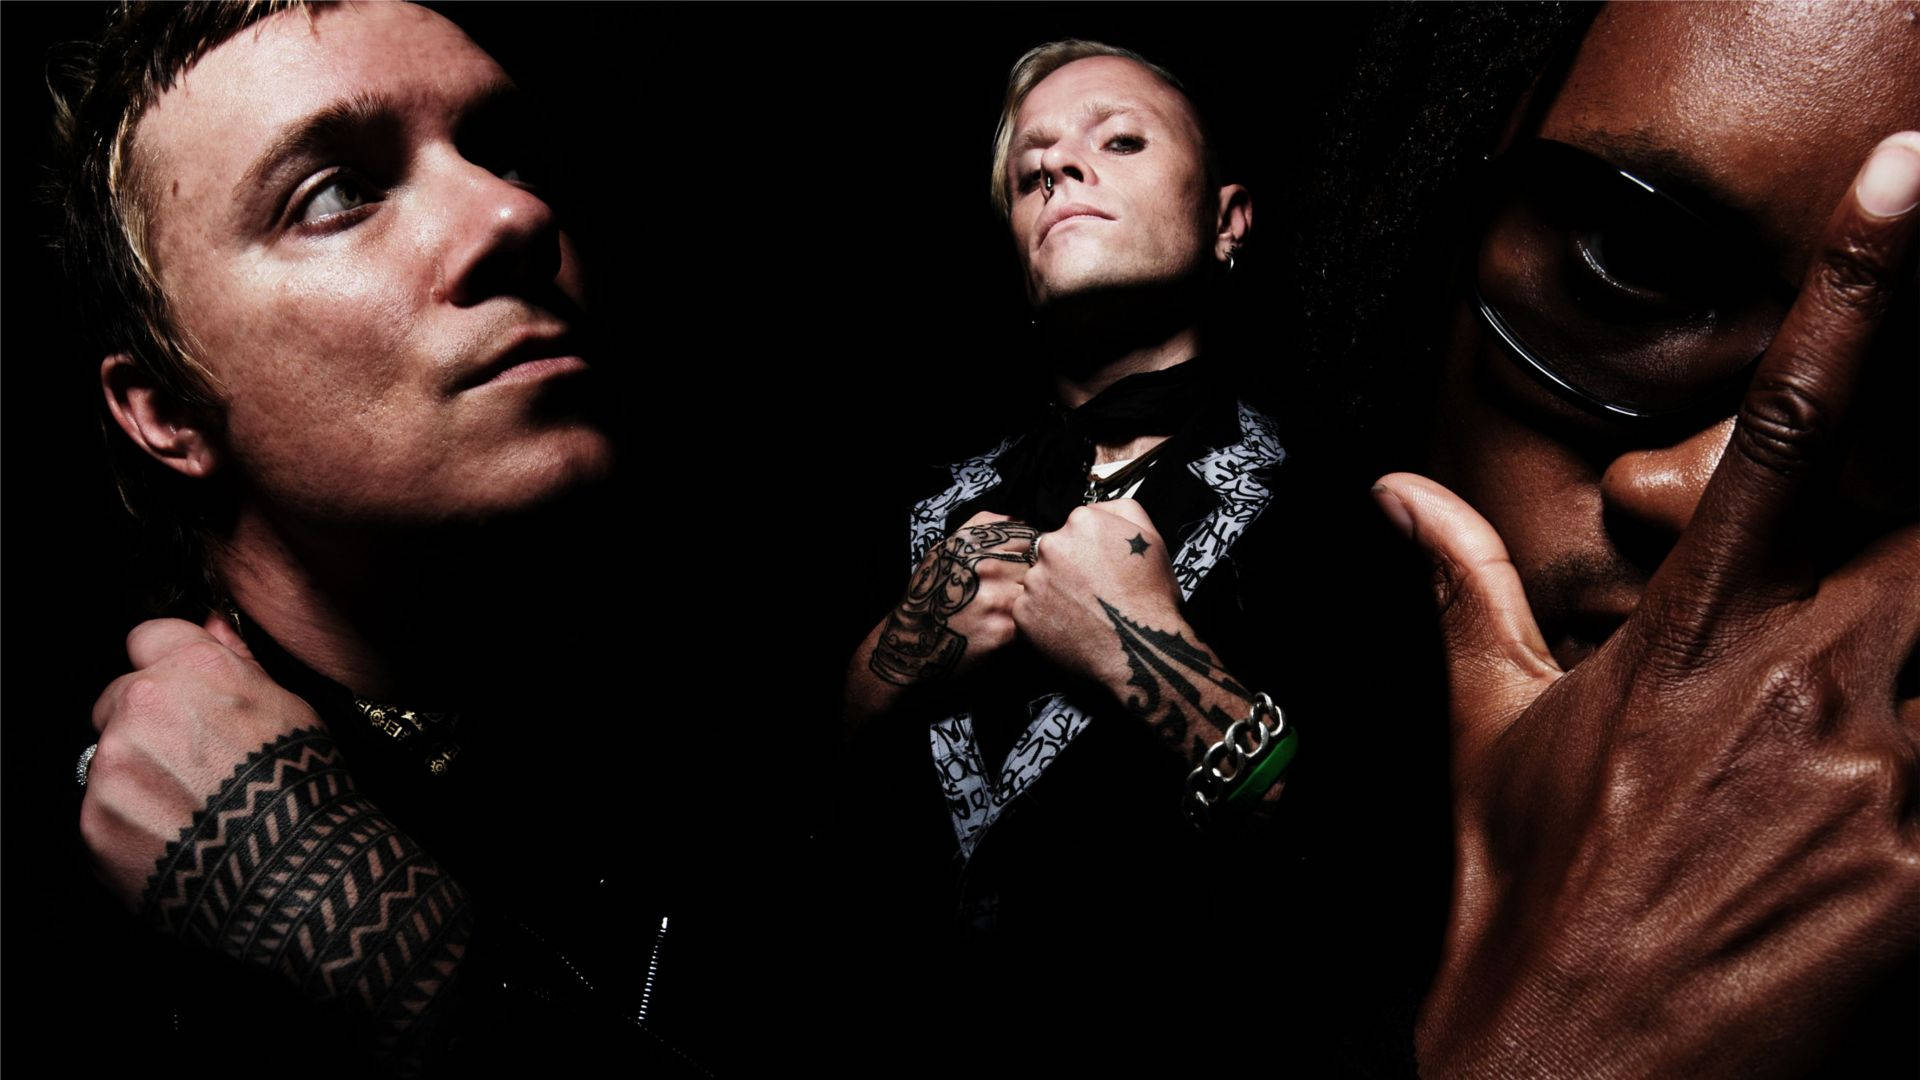 Download The Prodigy Band Members Wallpaper | Wallpapers.com